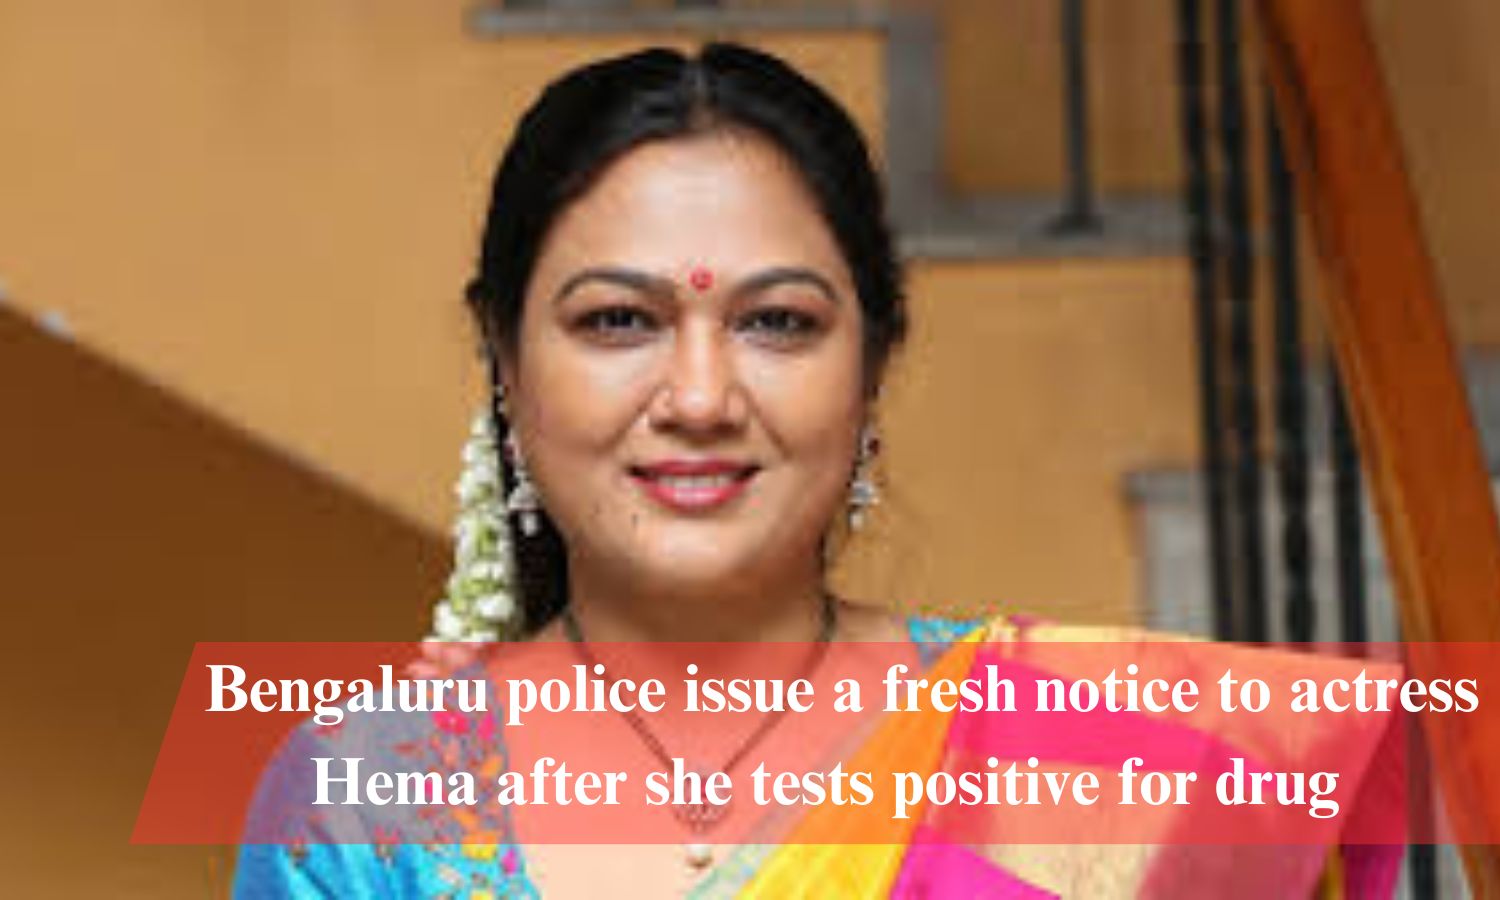 Bengaluru Police Issue A Fresh Notice To Actress Hema After She Tests Positive For Drug